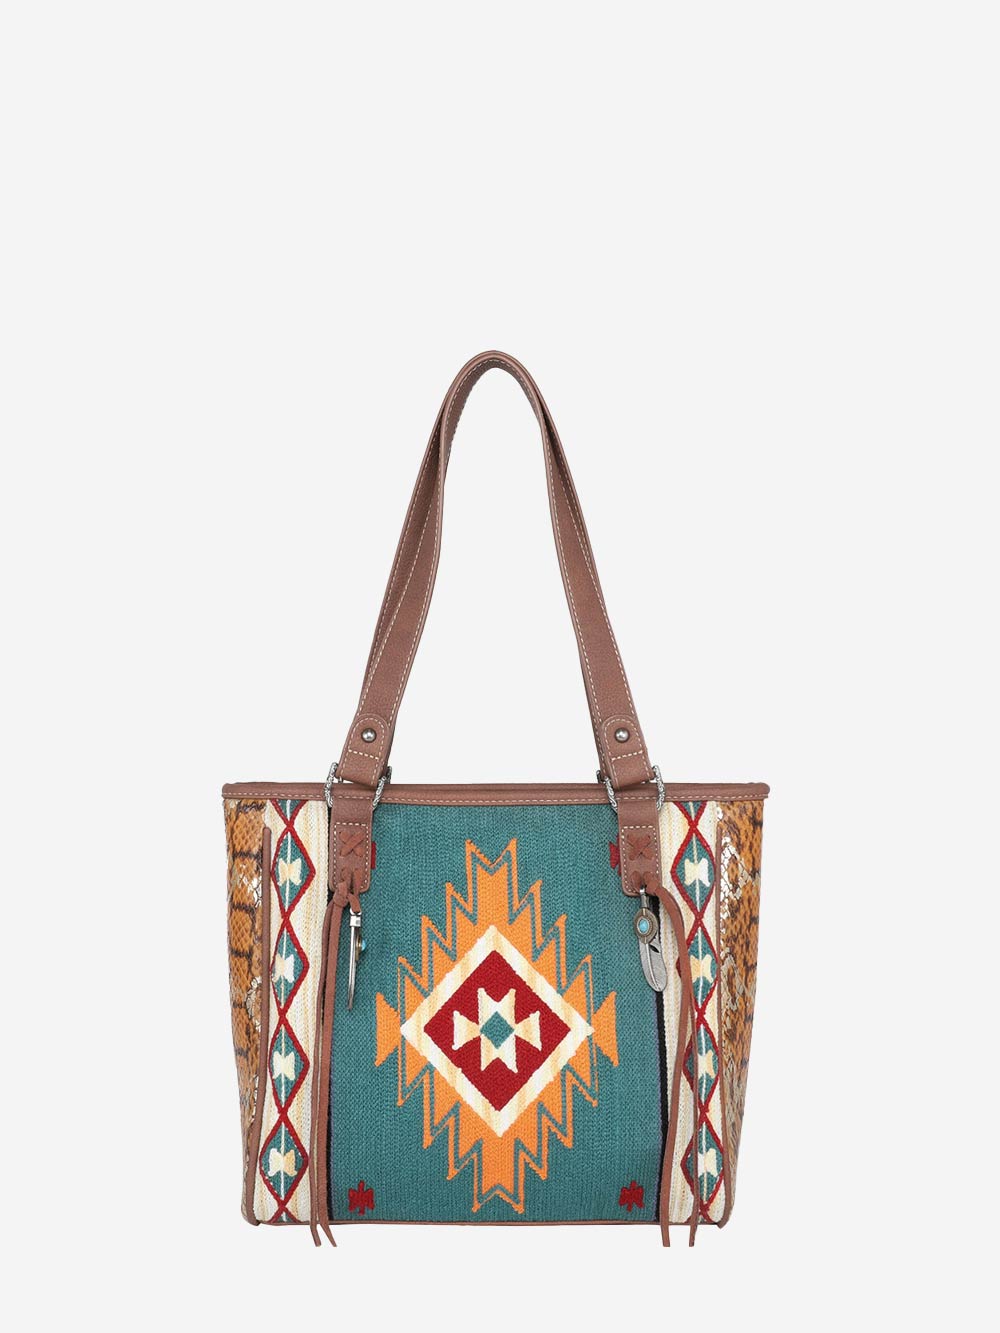 Montana West Aztec Tapestry Concealed Carry Tote Bag - Montana West World